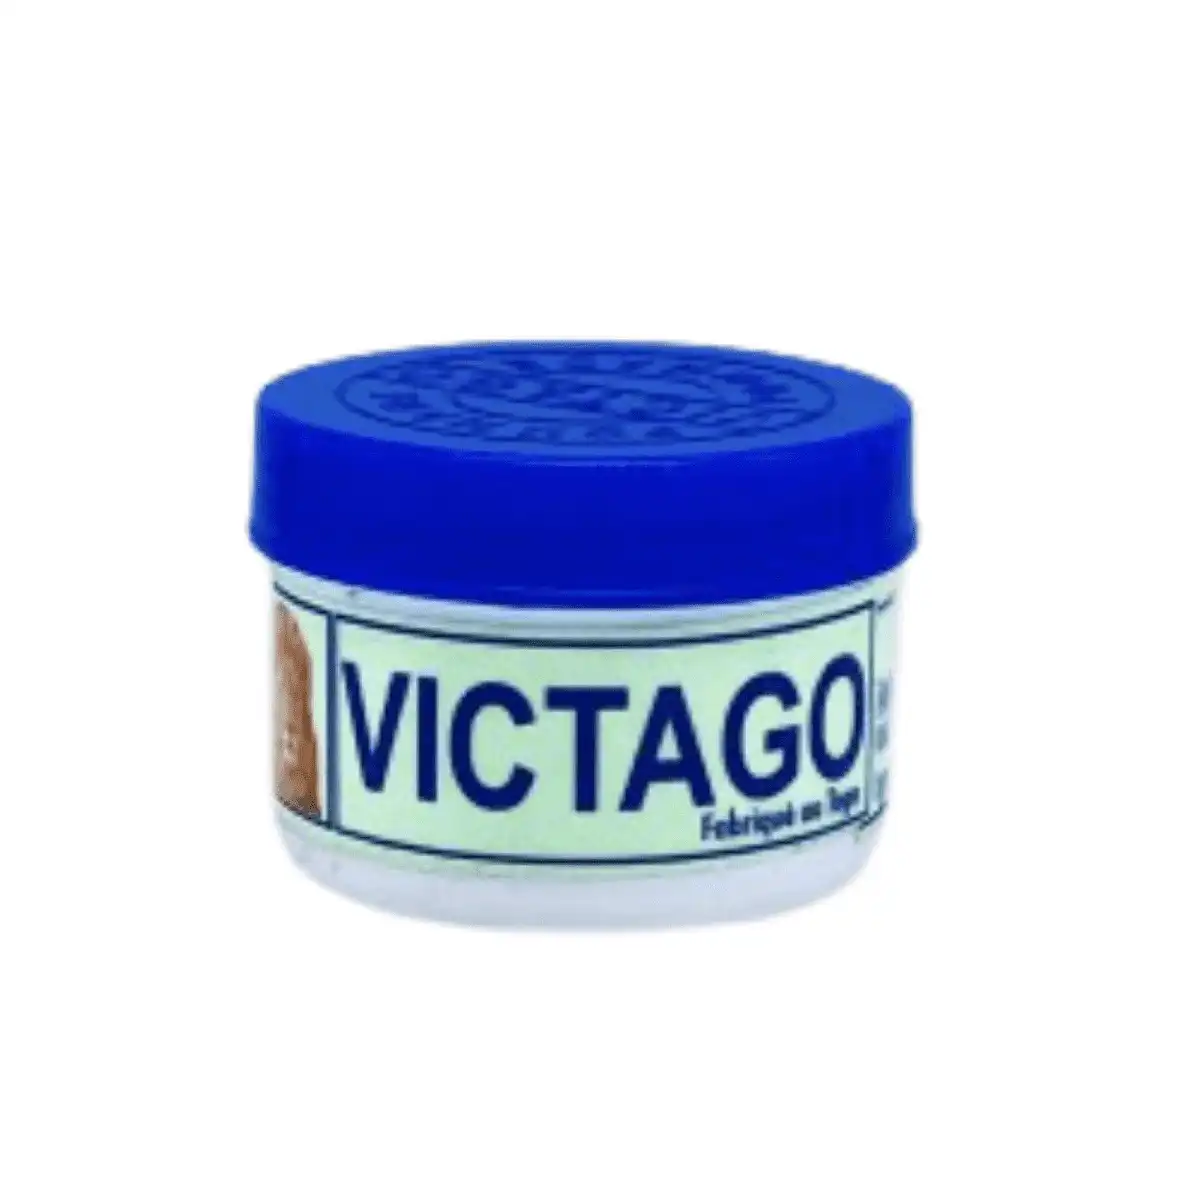 victago menthol ointment